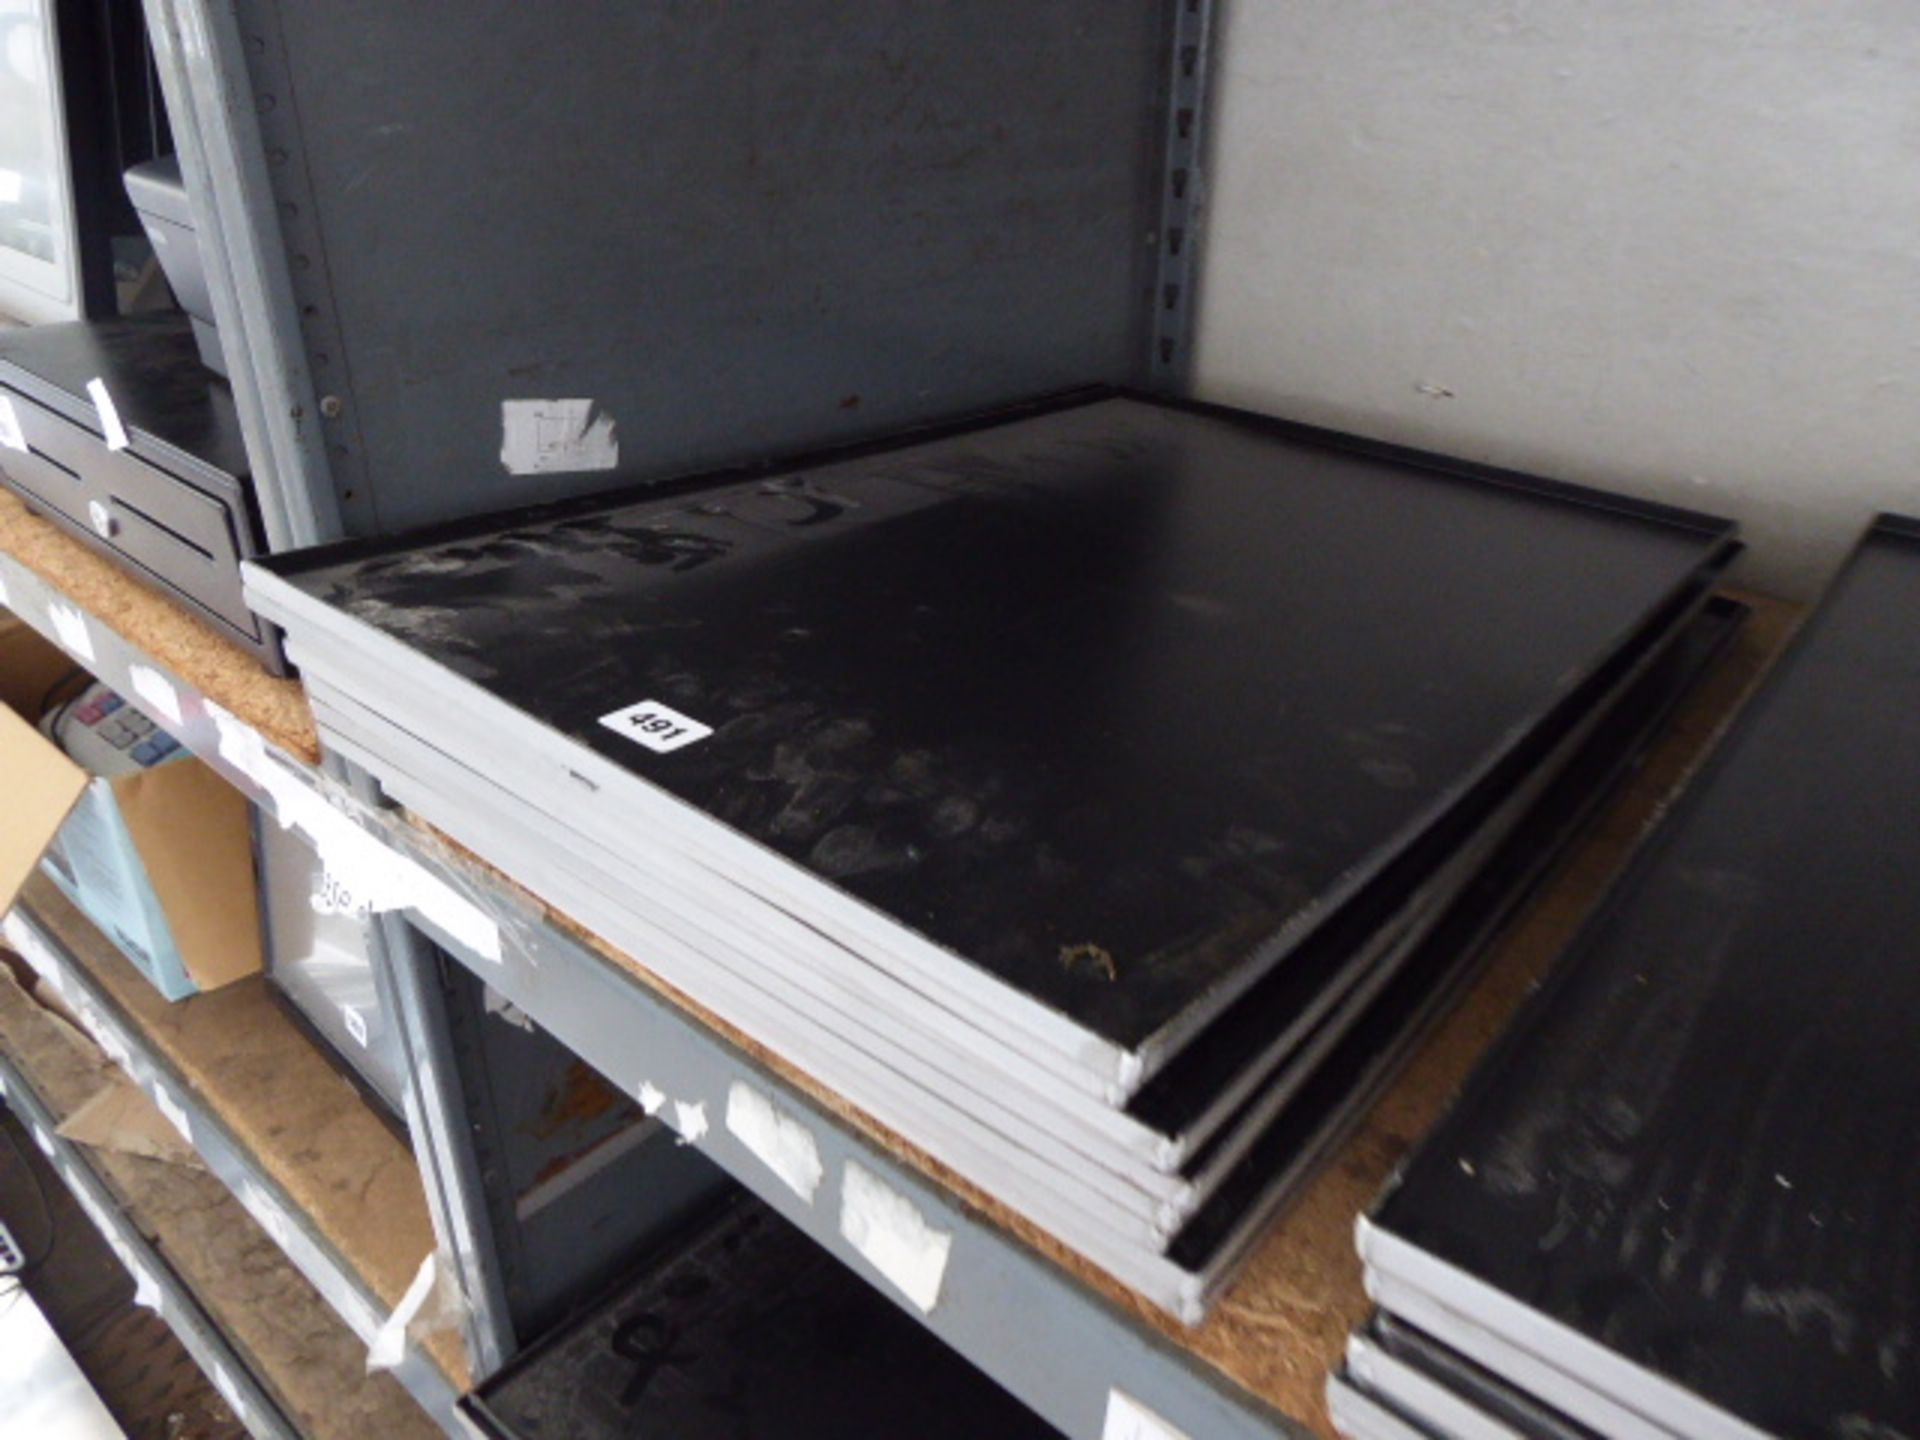 Approx 9 60cm x 40cm bakers trays